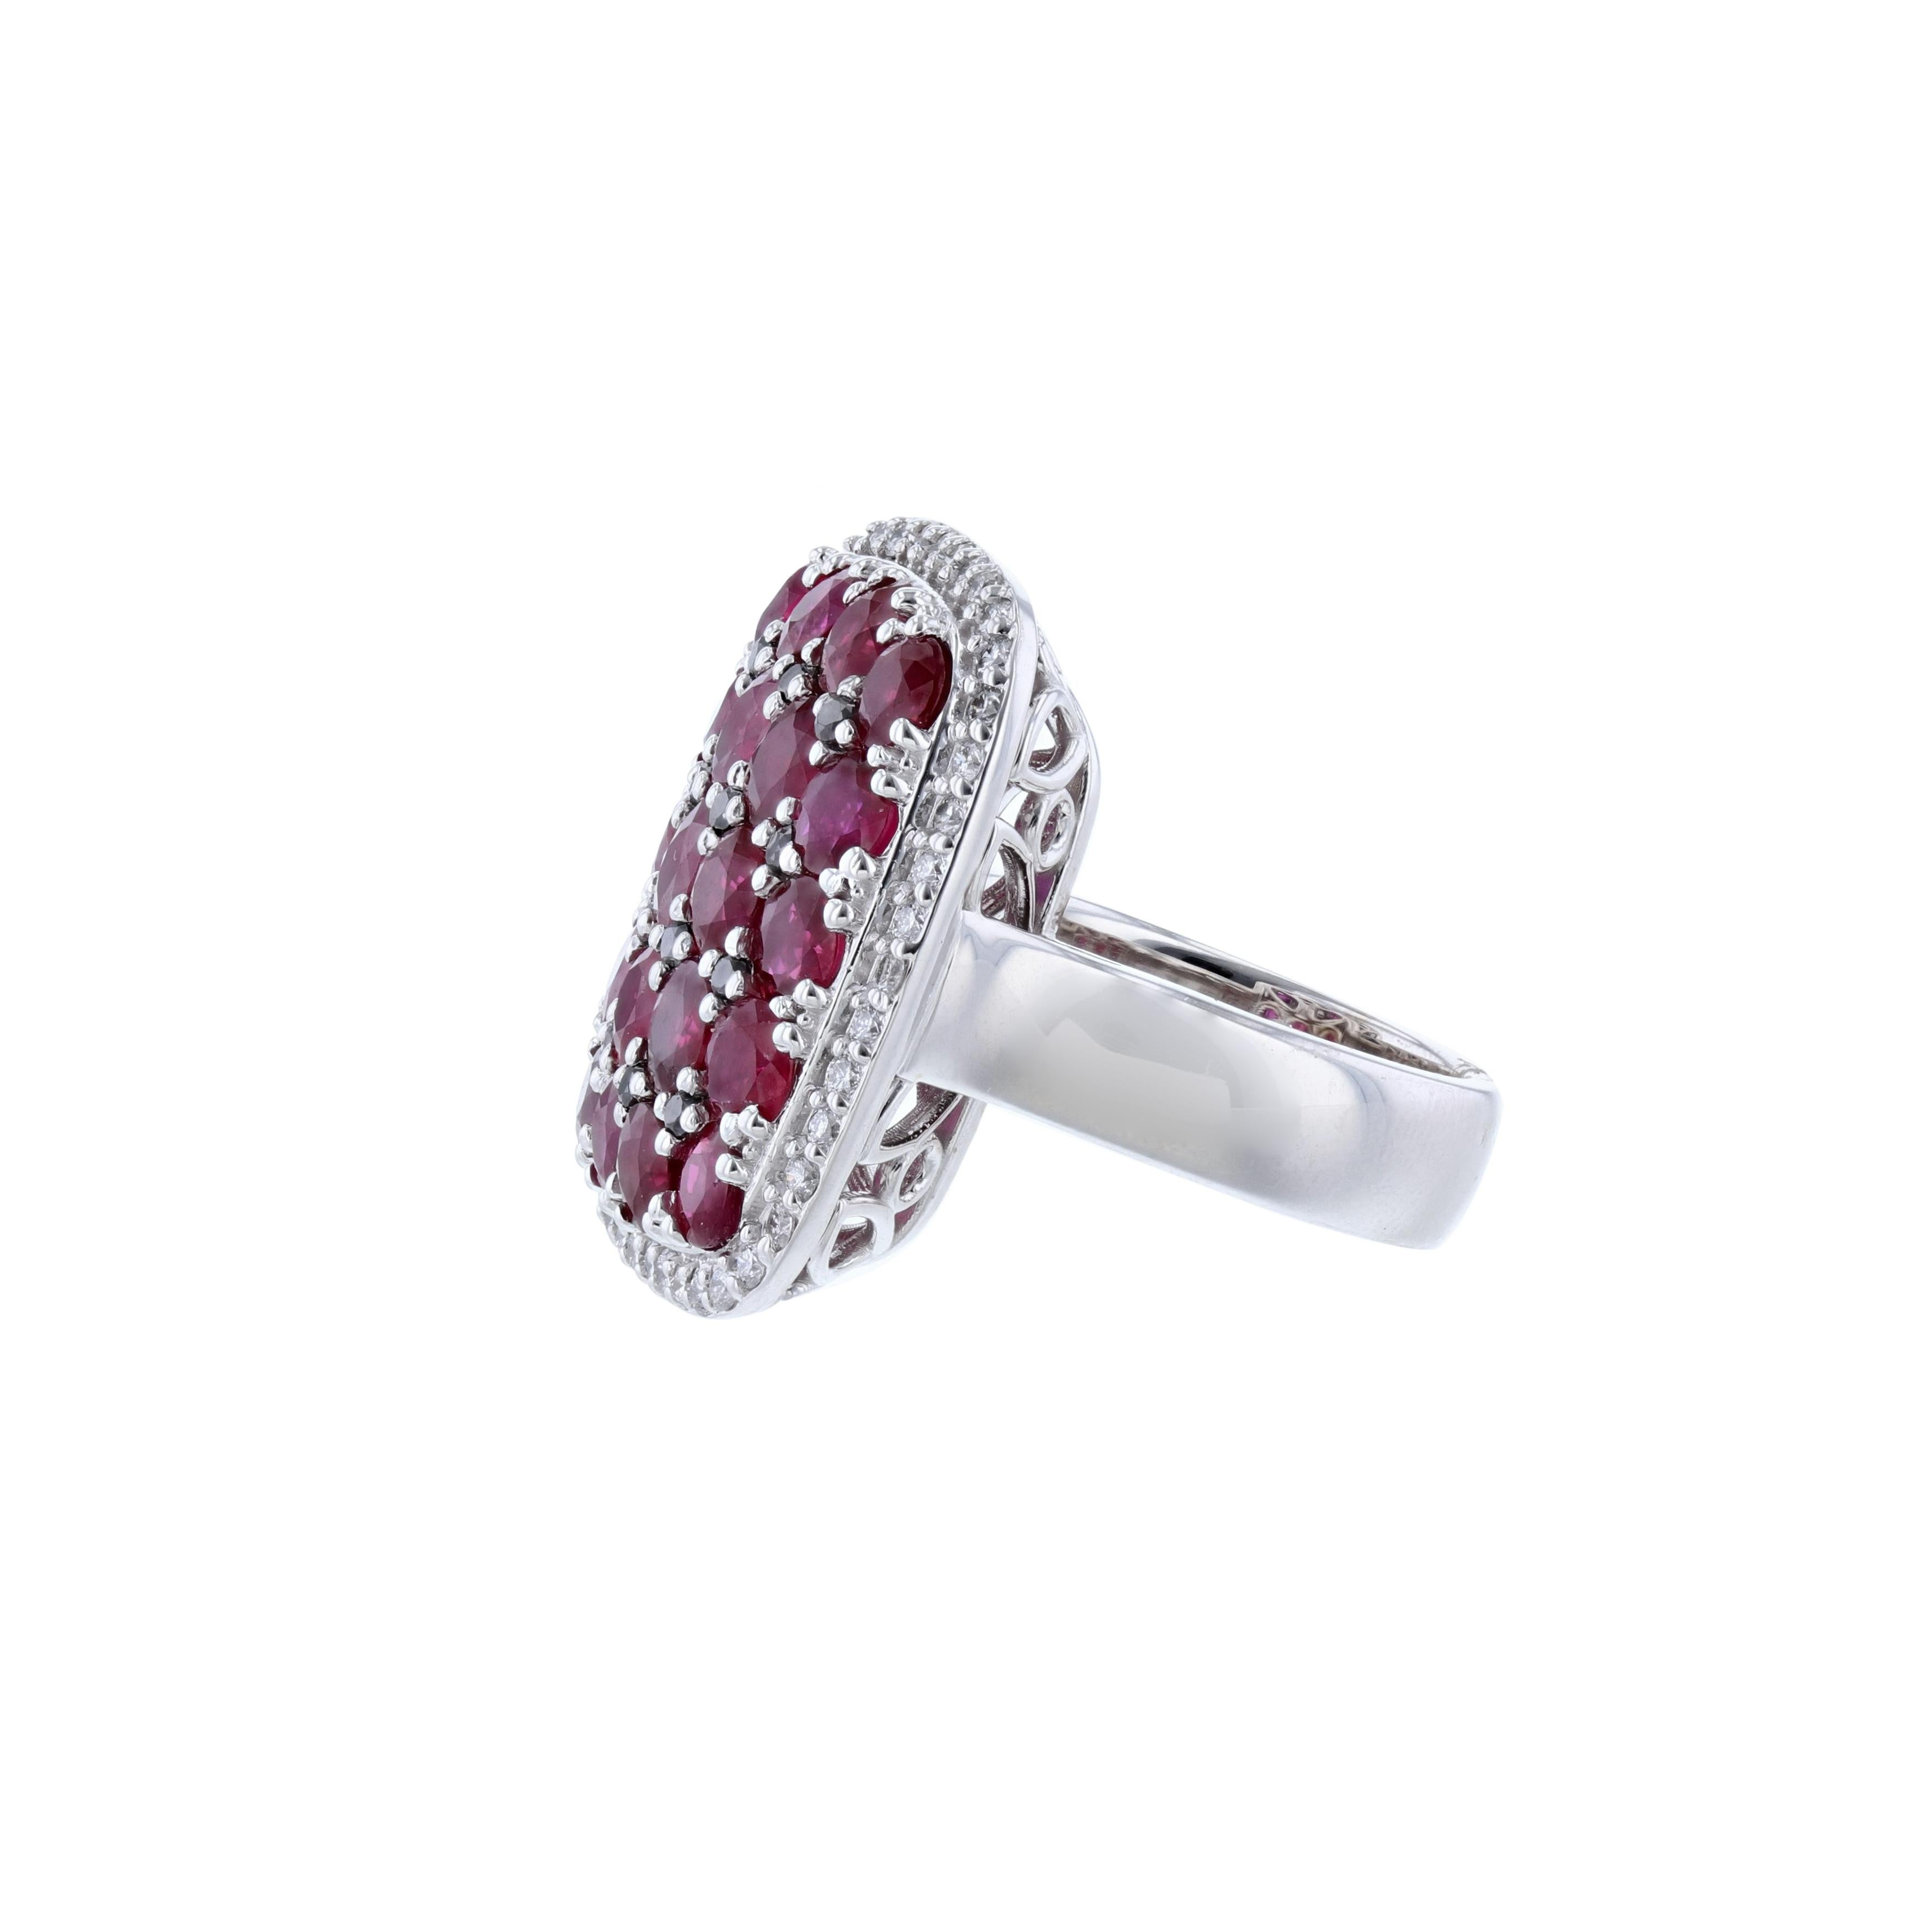 This ring is 14K white gold and features 20 round cut rubies and 12 heat treated, black diamonds. Surrounded by 44 round cut diamonds. All stones are prong set and weigh 7.81 carats combined.